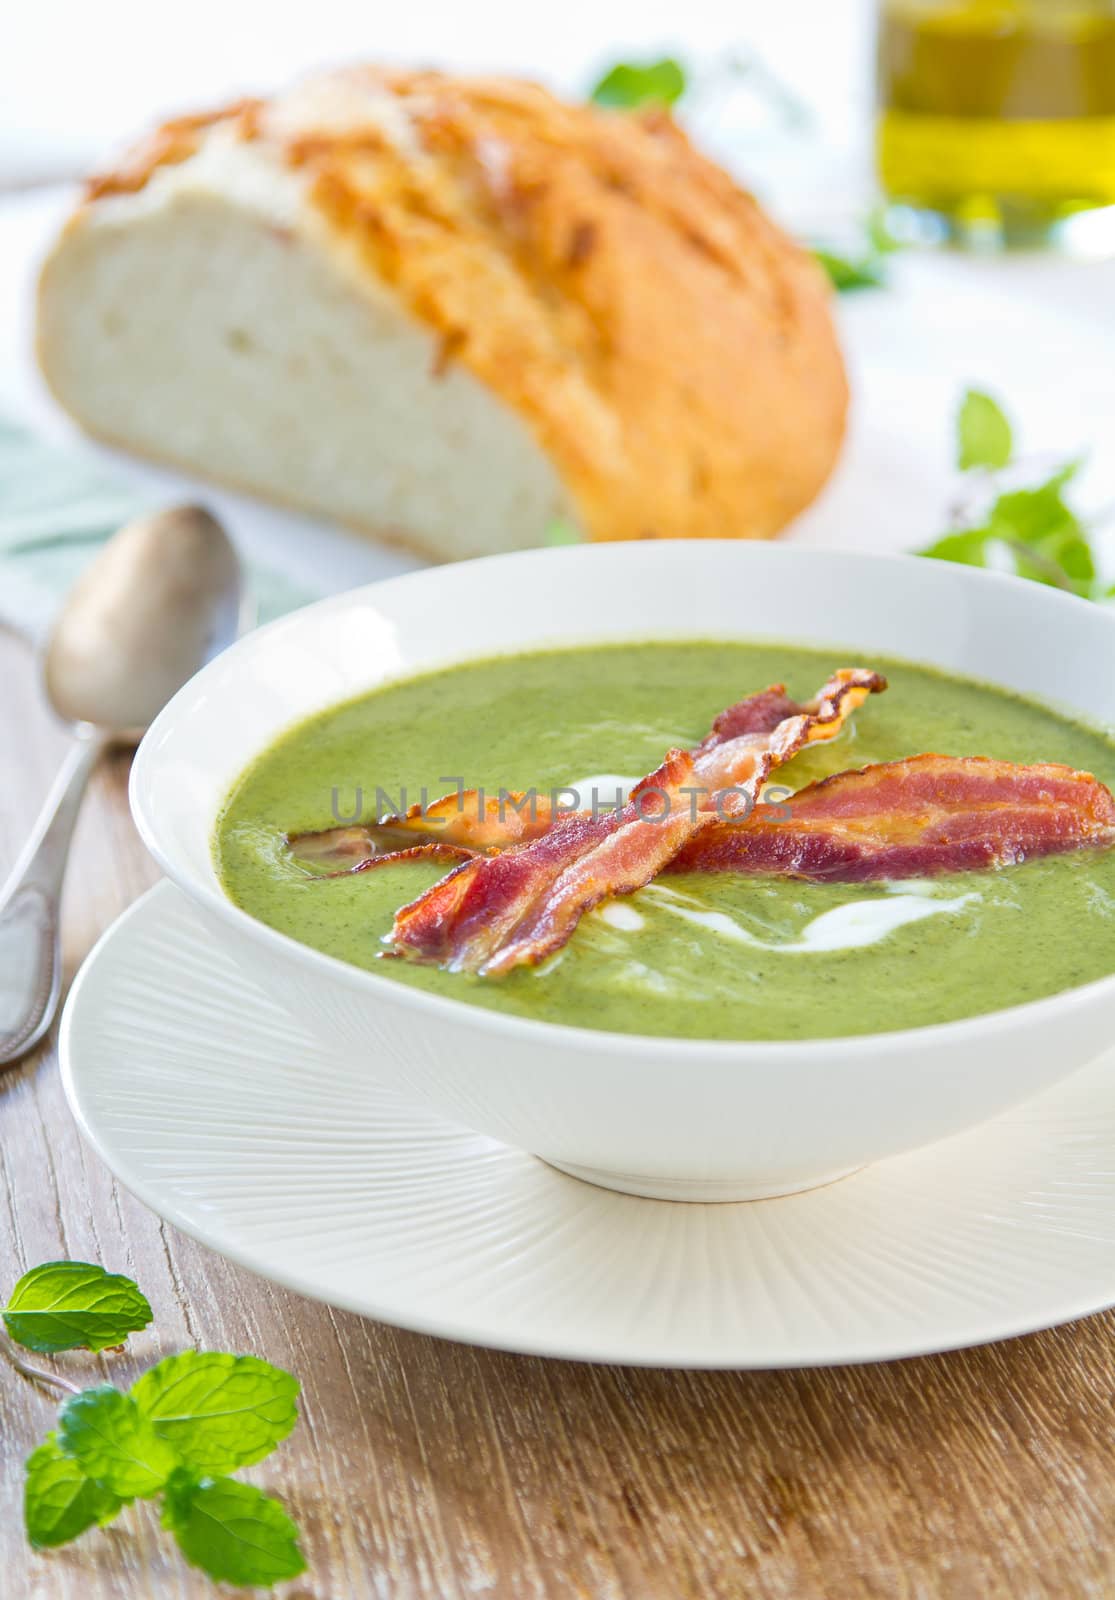 Pea,mint and celery soup by vanillaechoes